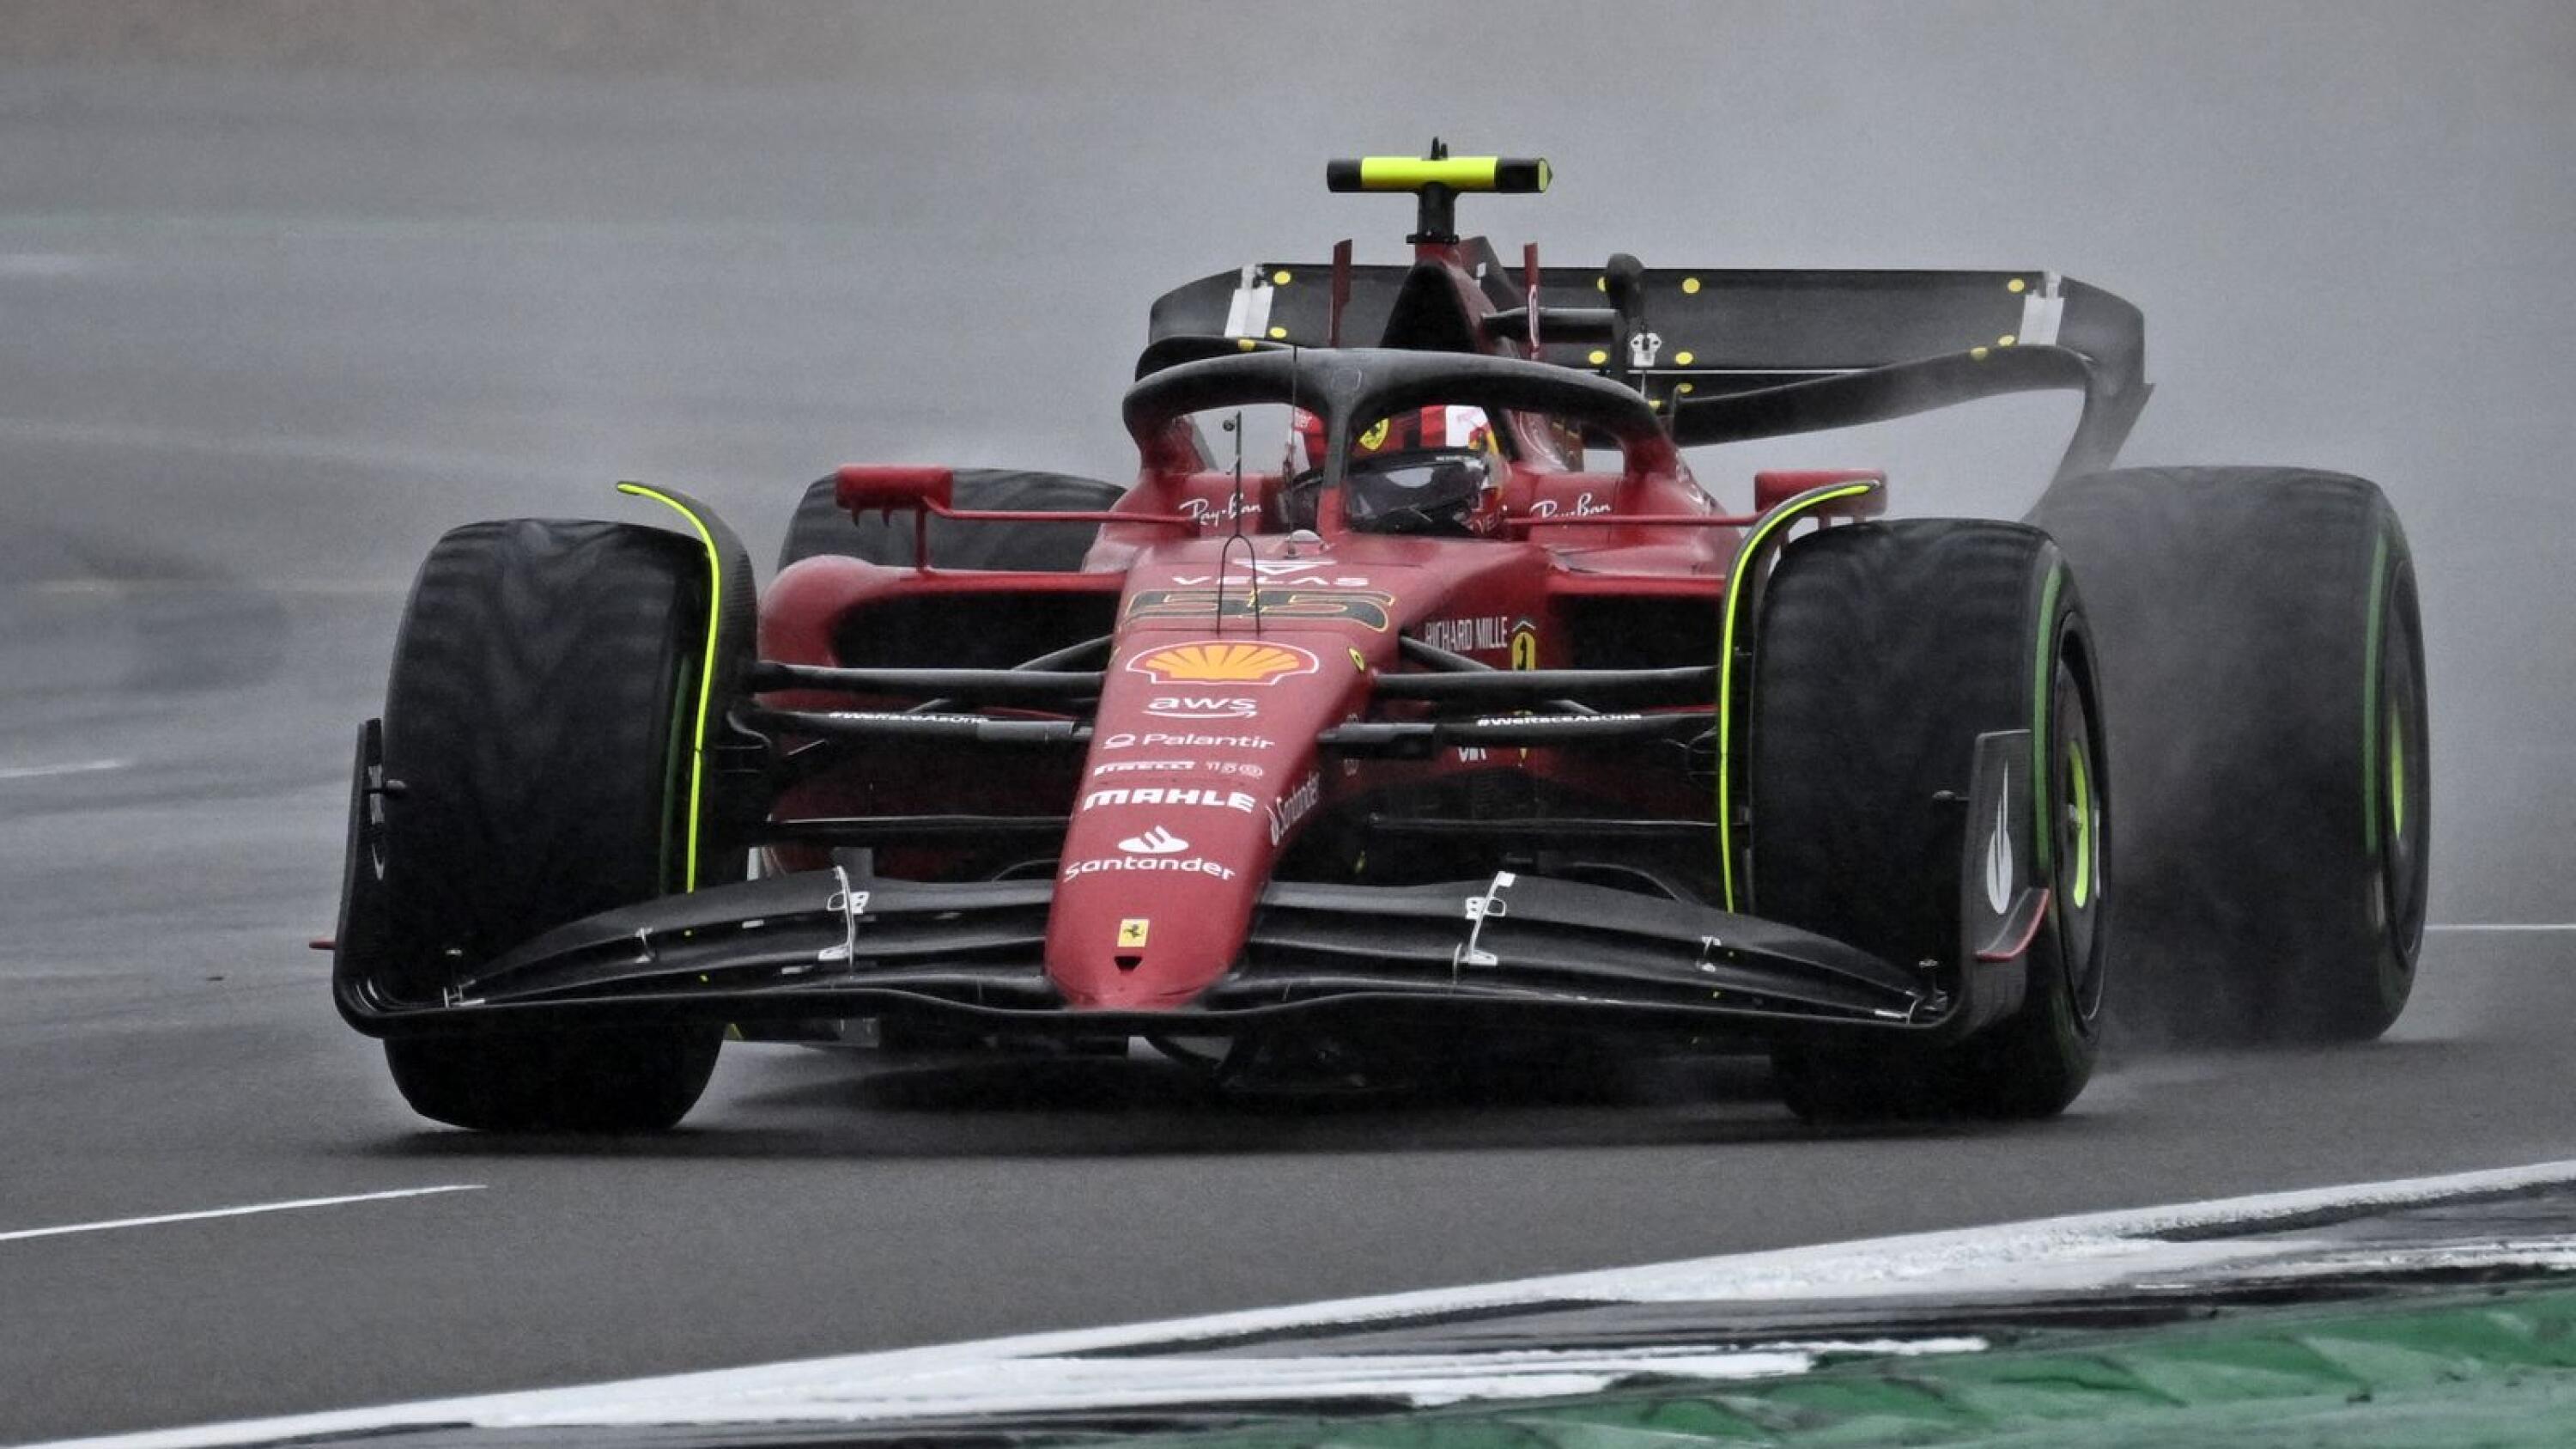 Ferrari's Spanish driver Carlos Sainz Jr finishes his lap during the third and final qualifying session to take pole position for the Formula One British Grand Prix at the Silverstone motor racing circuit in Silverstone